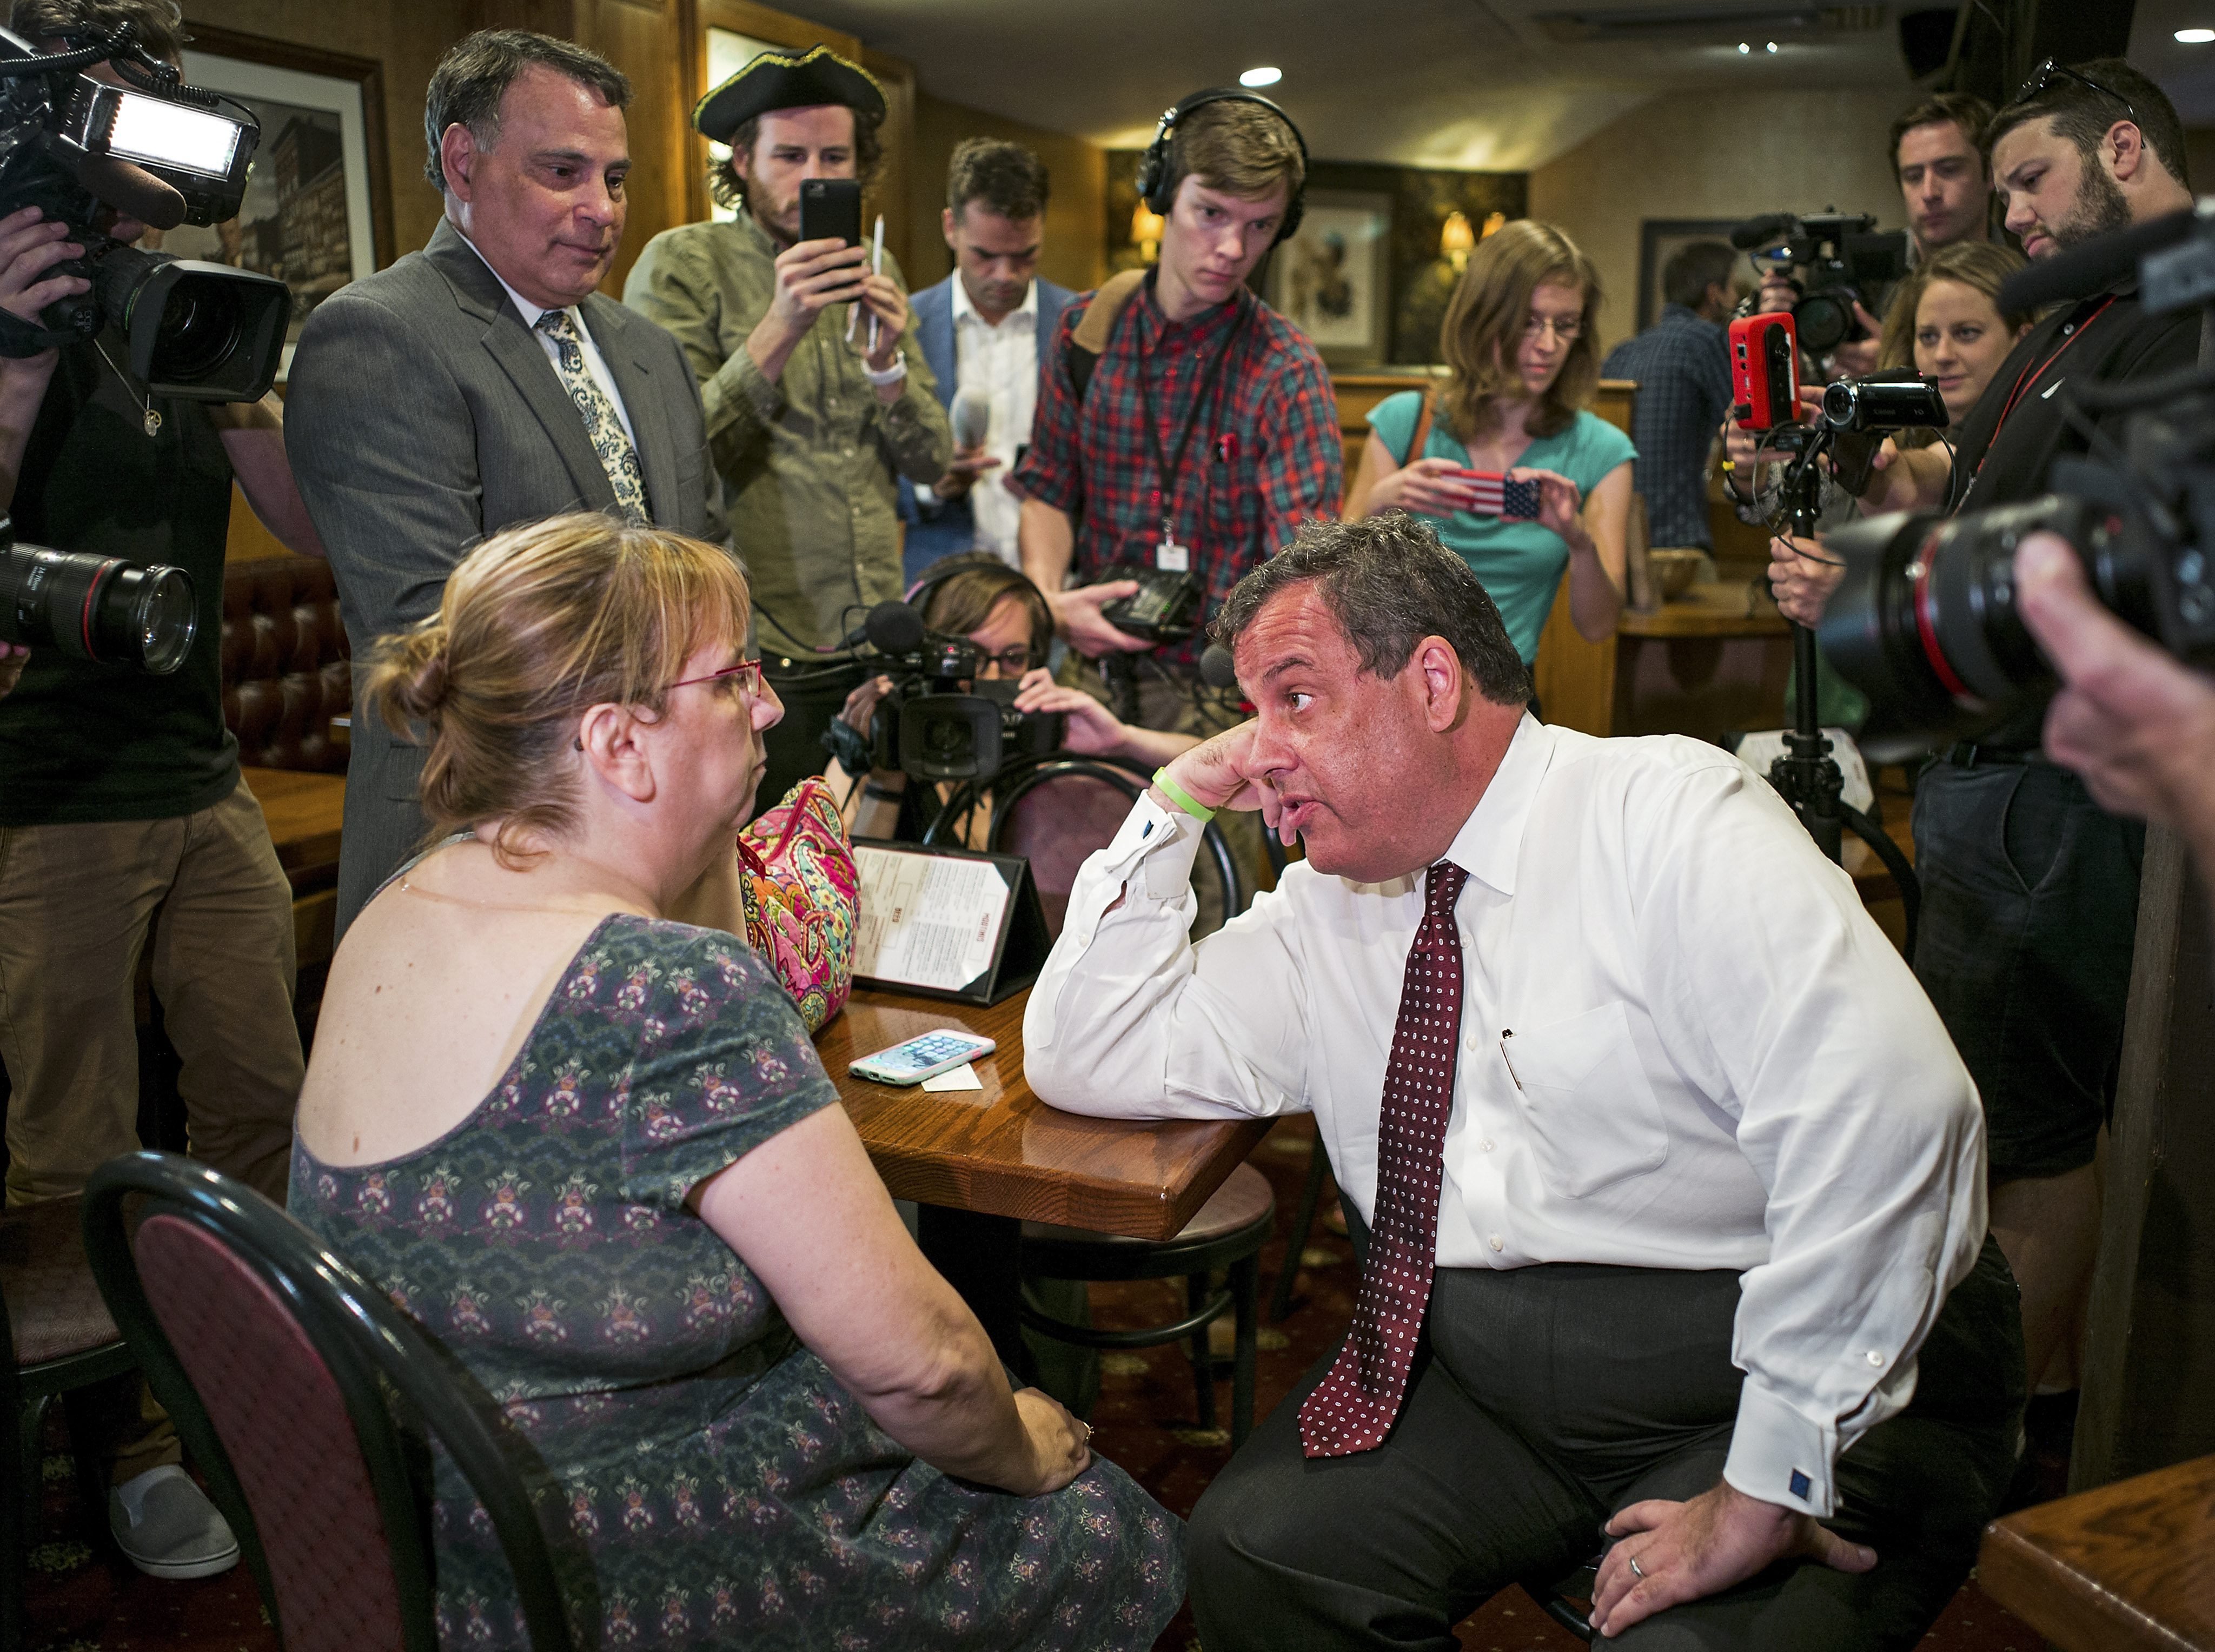 Chris Christie, Governor of New Jersey and candidate in the Republicans' presidential candidates race, talks with a voter at The Puritan Backroom in Manchester, N.H. on Aug. 3, 2015.